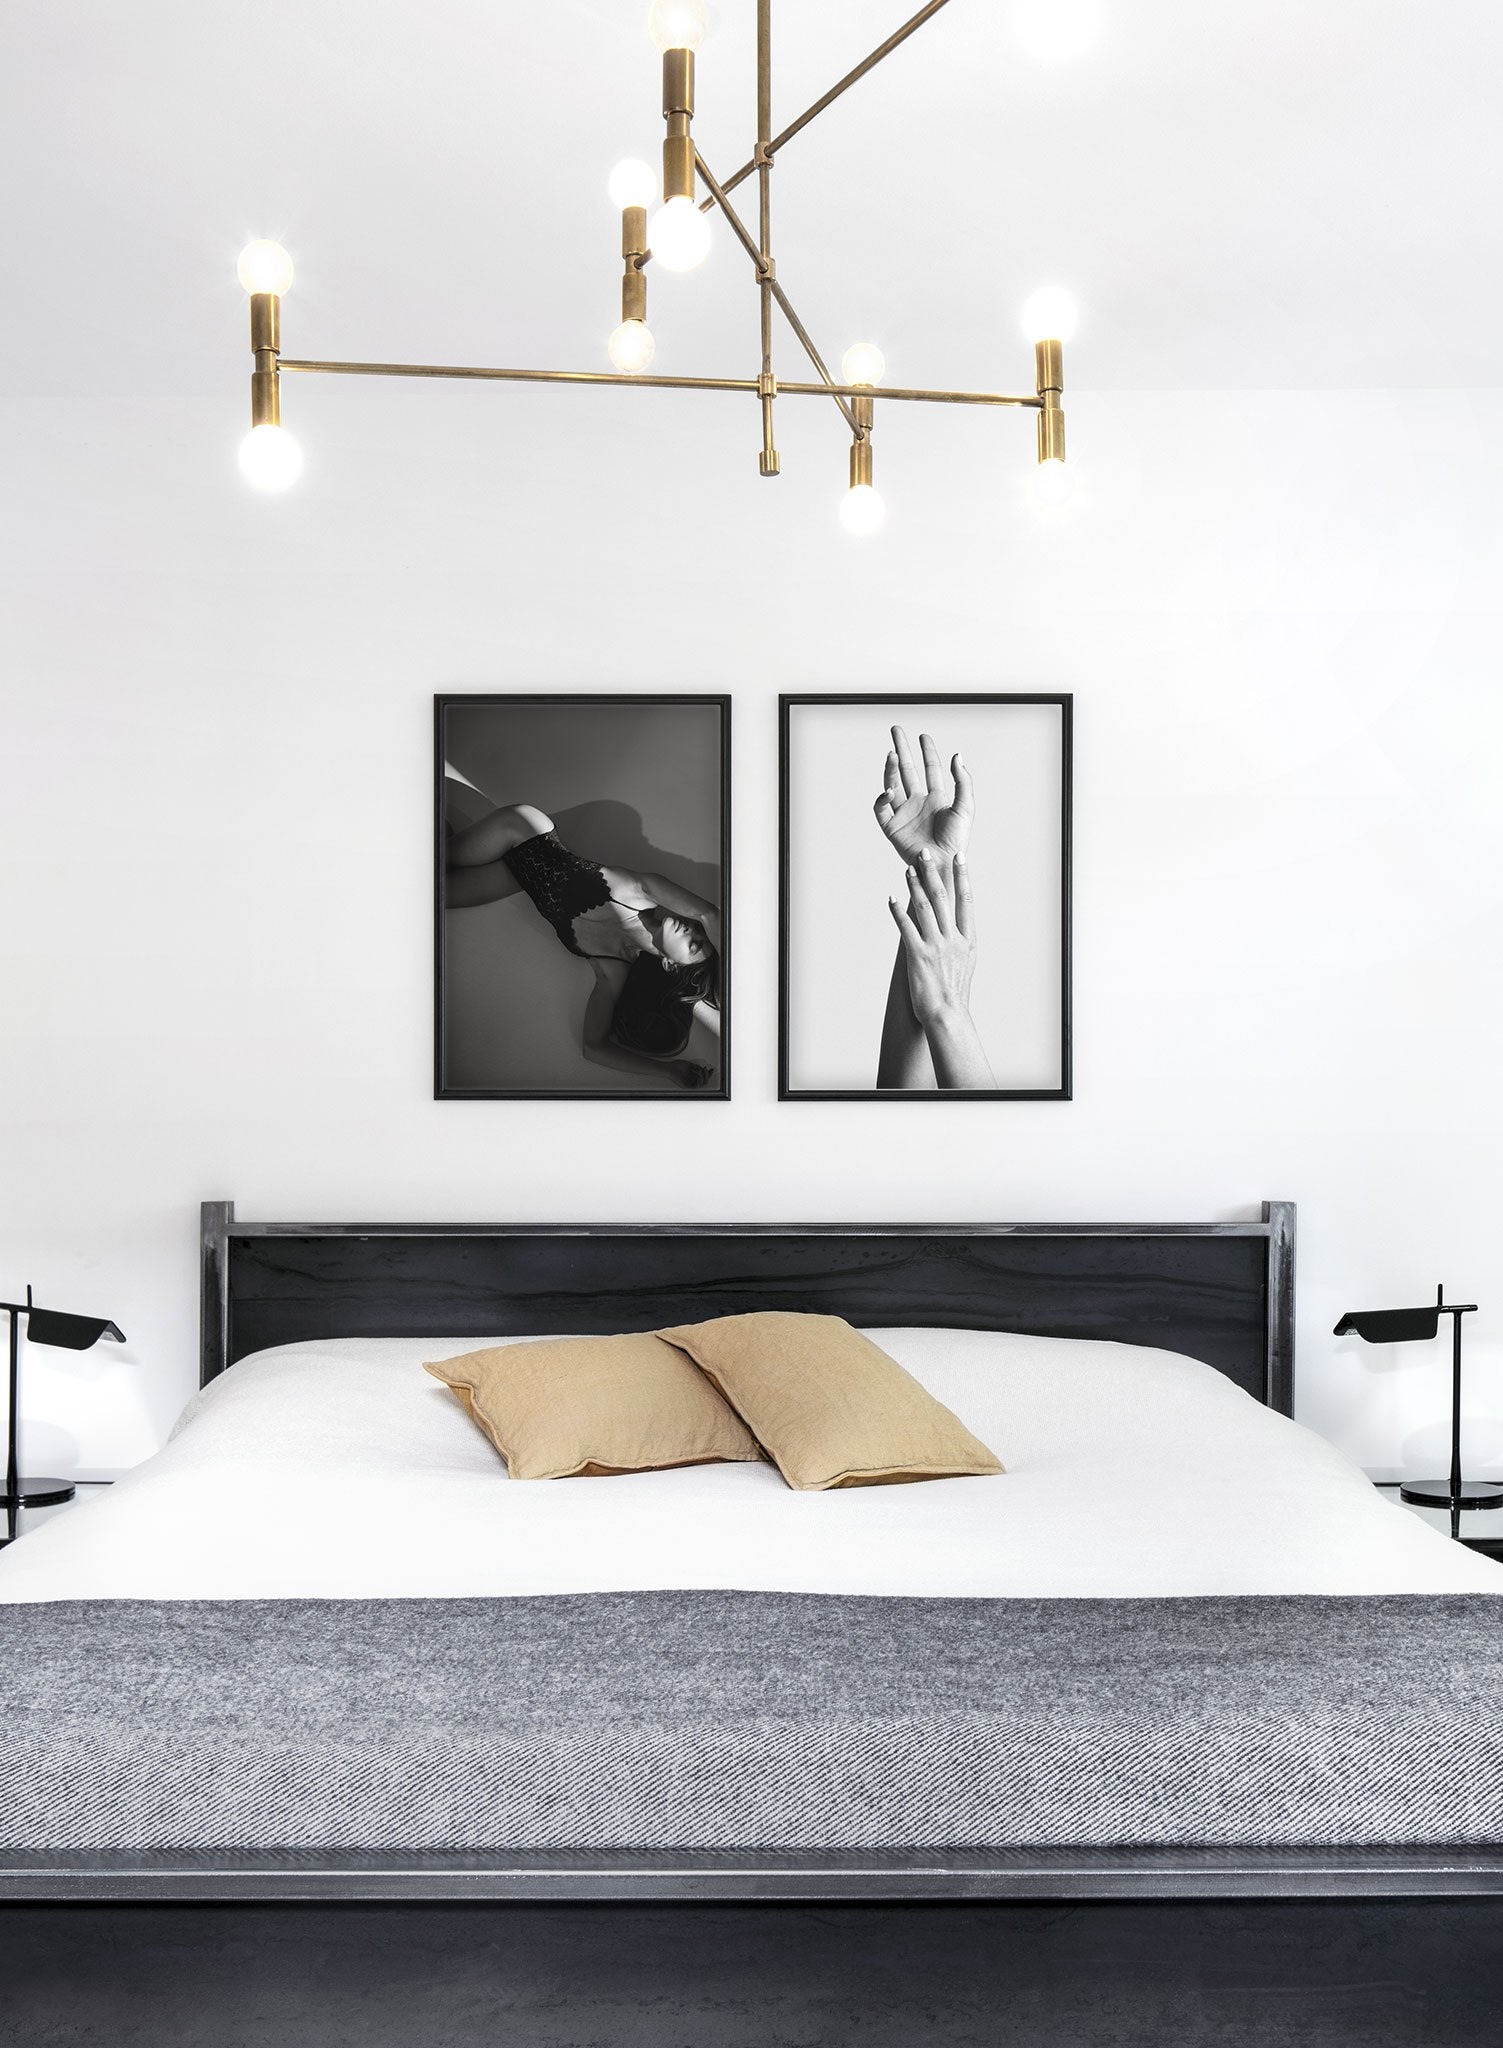 Black and white fashion photography poster by Opposite Wall with hands reaching - Lifestyle Duo - Bedroom